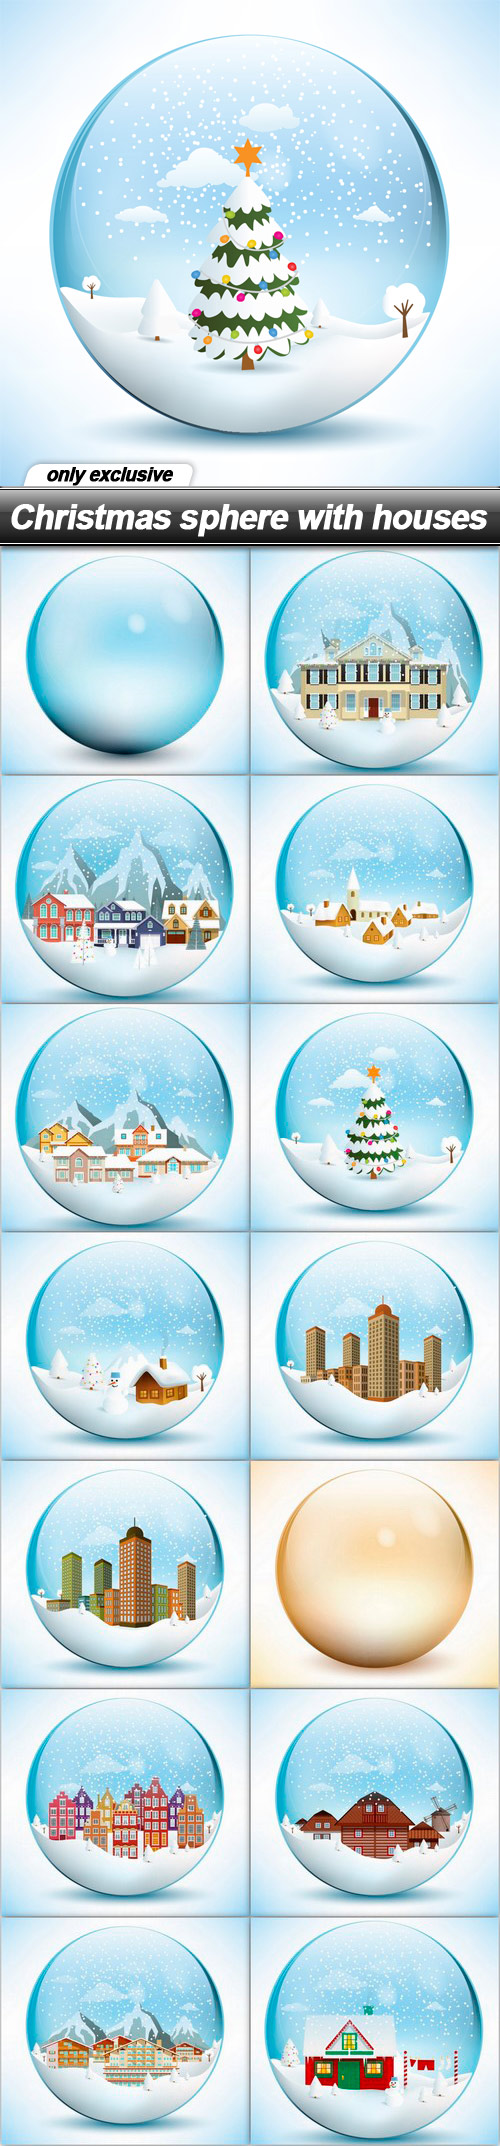 Christmas sphere with houses - 14 EPS